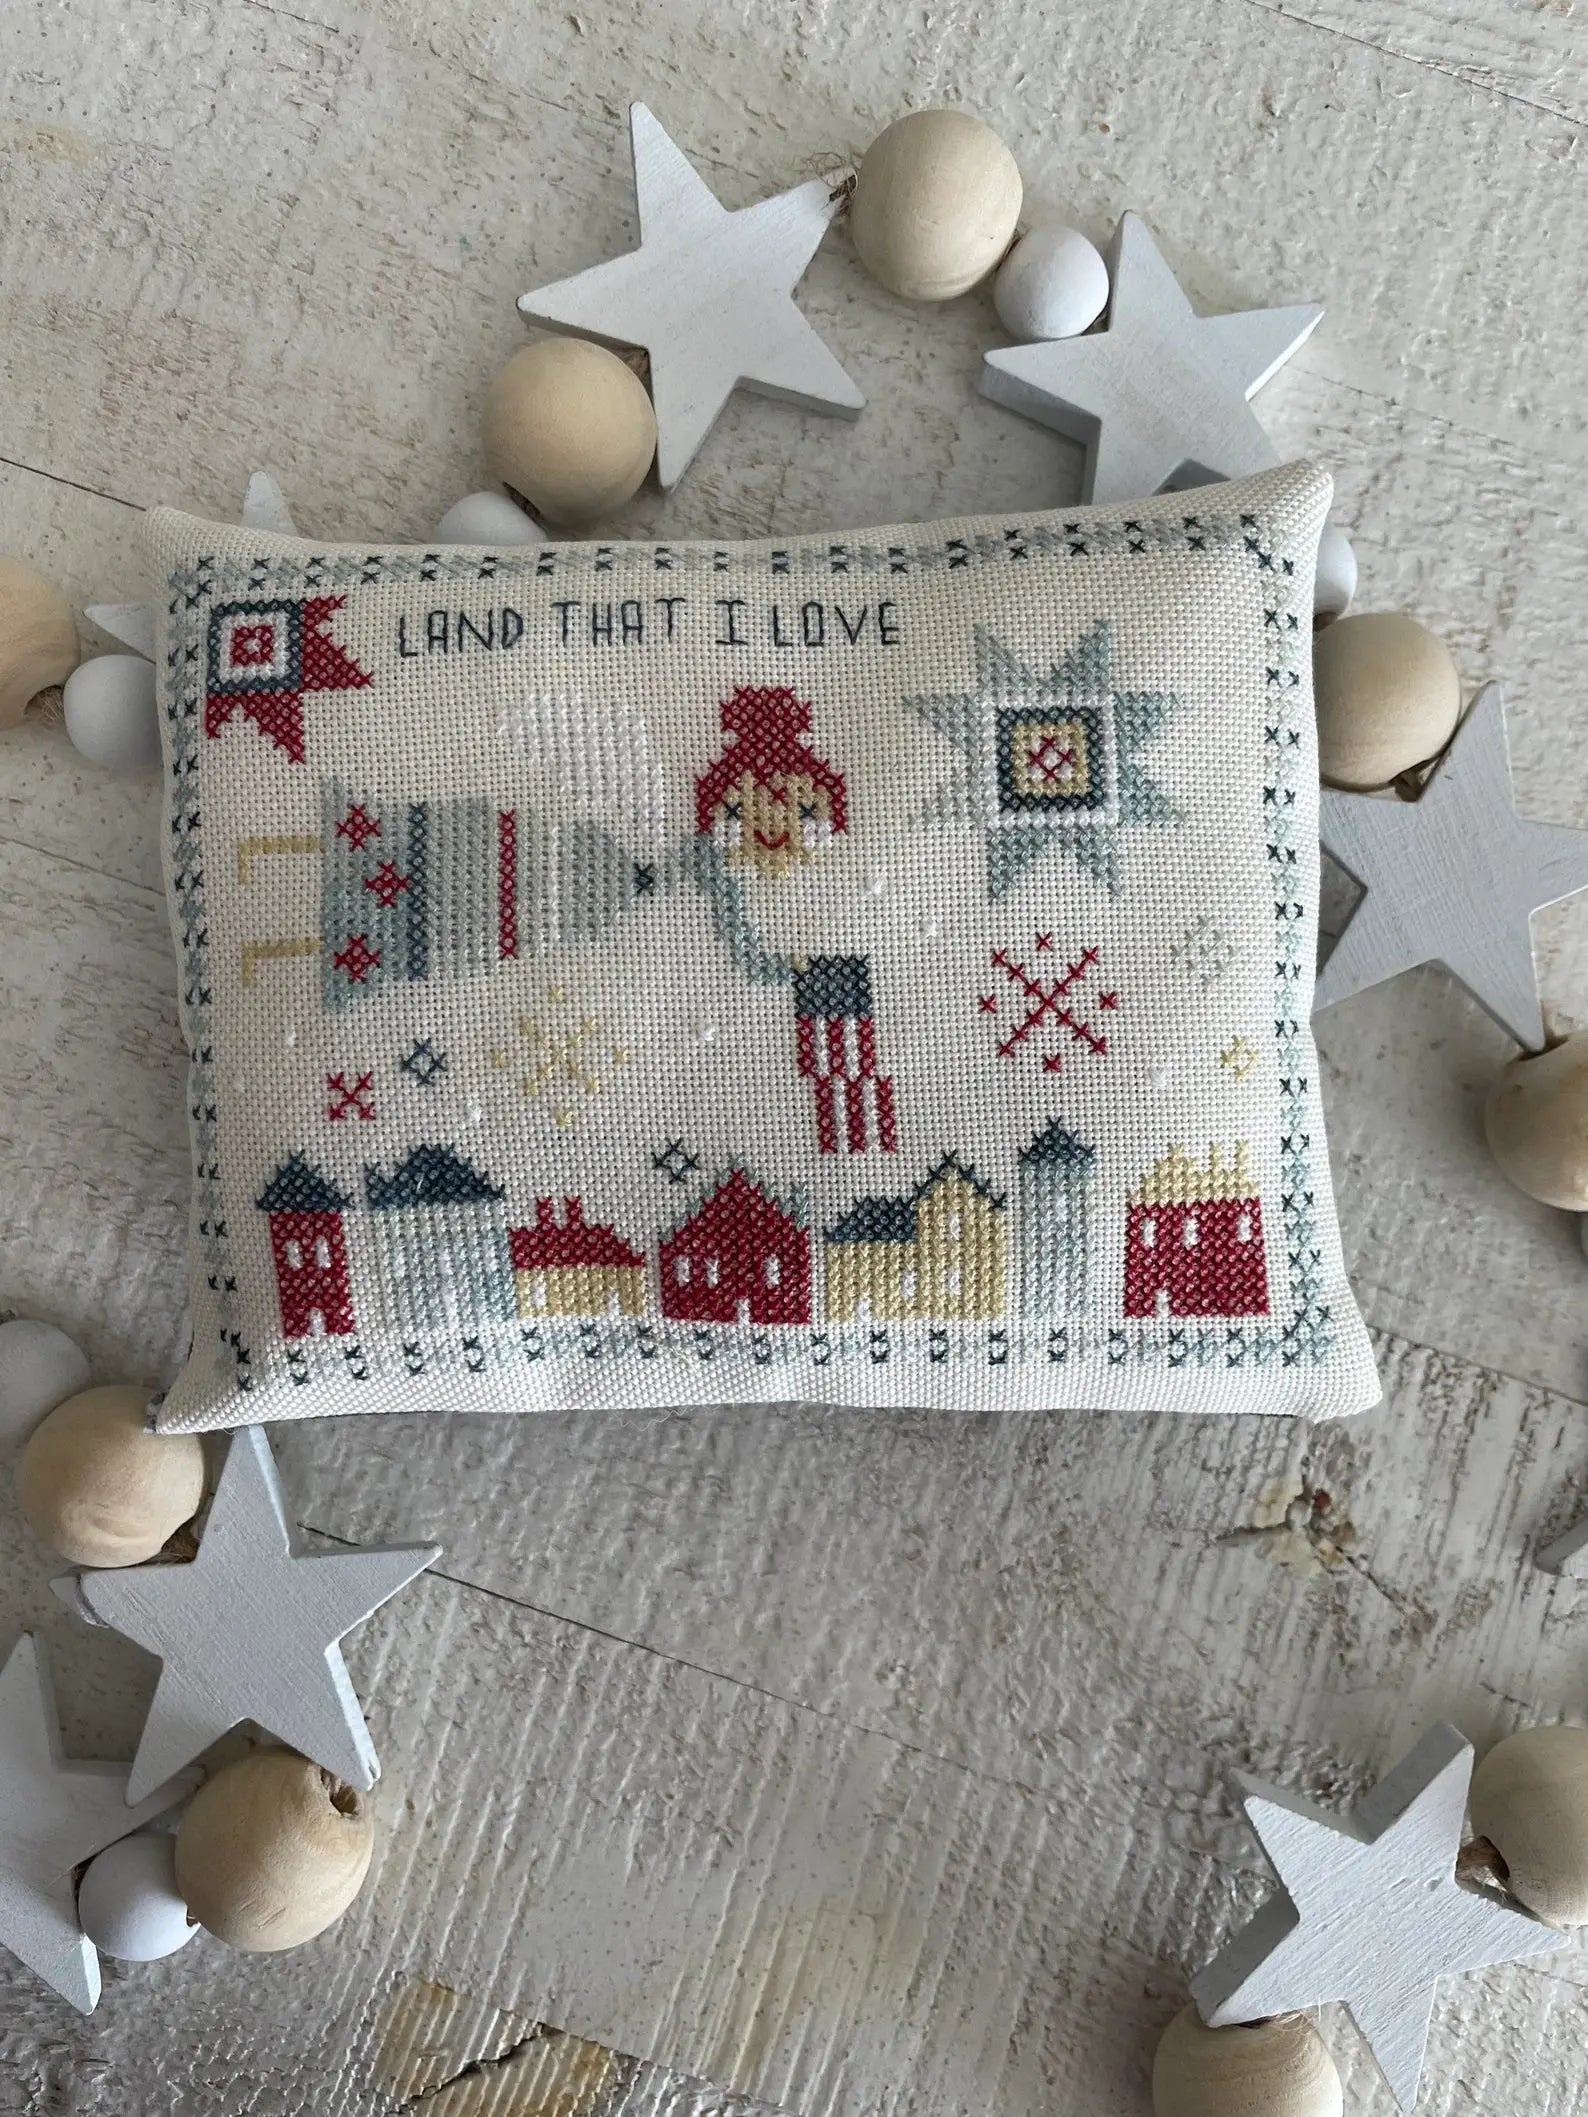 Land That I Love by Emily Call Stitching Emily Call Stitching